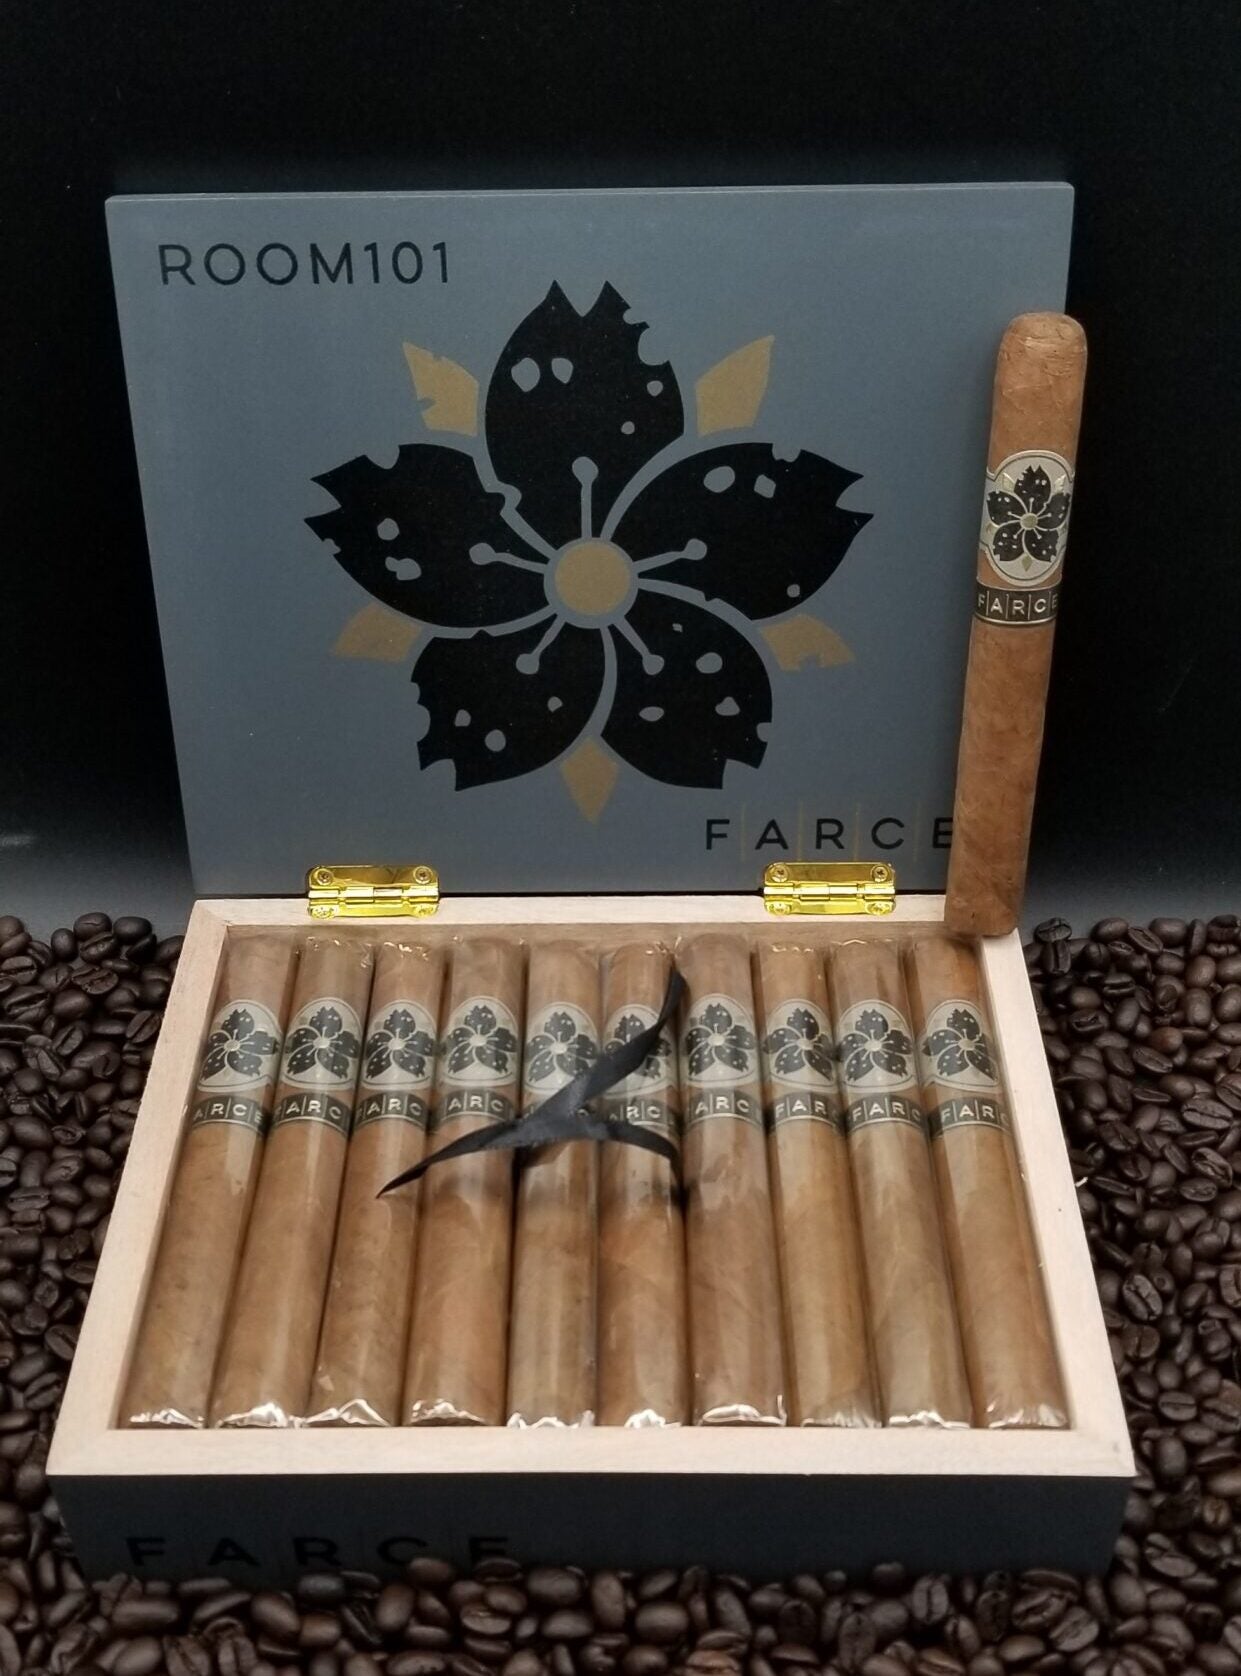 Room 101 Farce Habano Lonsdale cigars supplied by Sir Louis Cigars